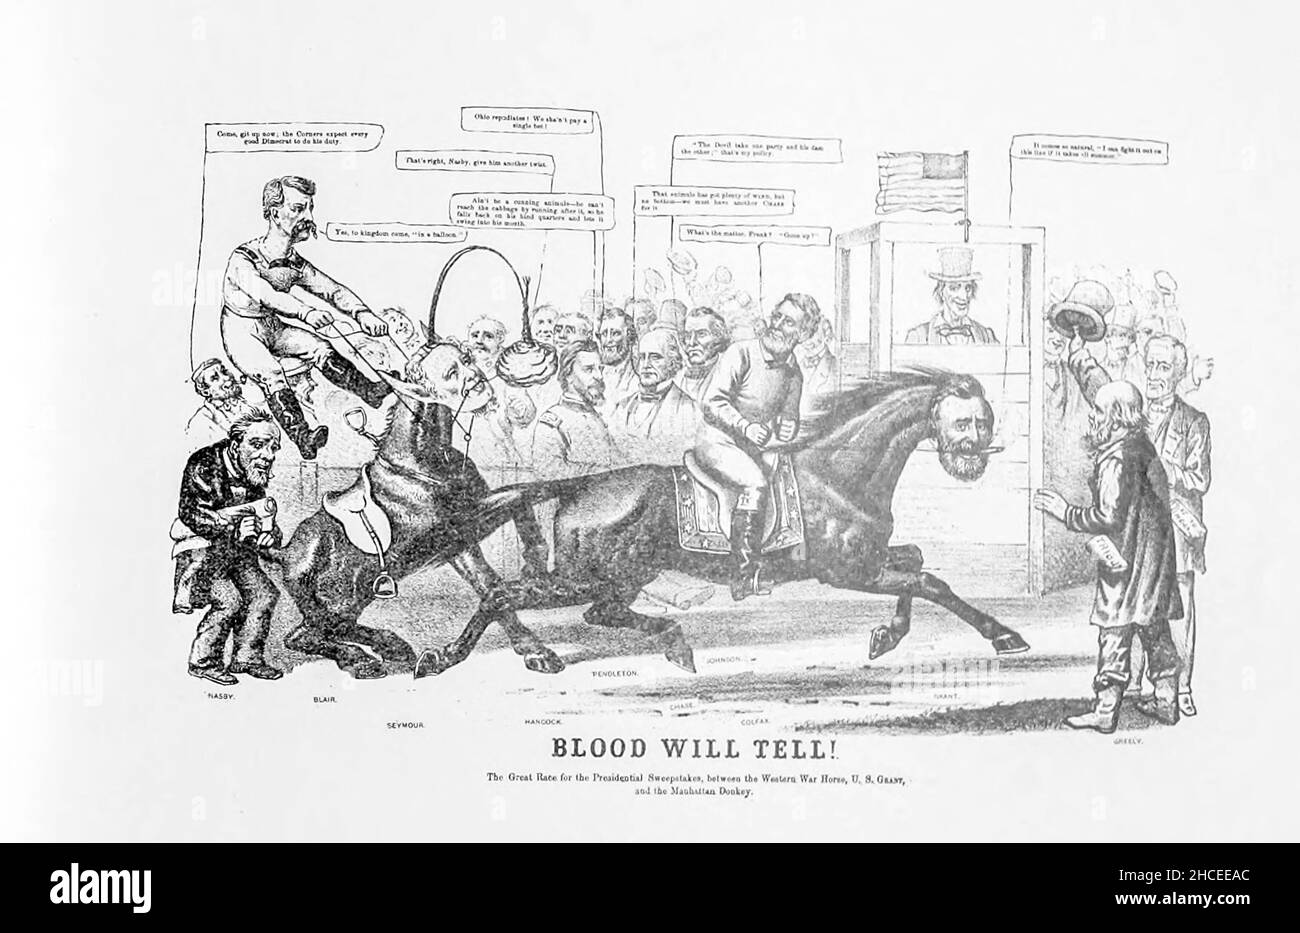 BLOOD WILL TELL The Great Race for the Presidential Sweepstakes between the Western war Horse U.S. Grant and the Manhattan Donkey from a collection of Caricatures pertaining to the Civil War published in 1892 on Heavy Plate Paper Stock Photo